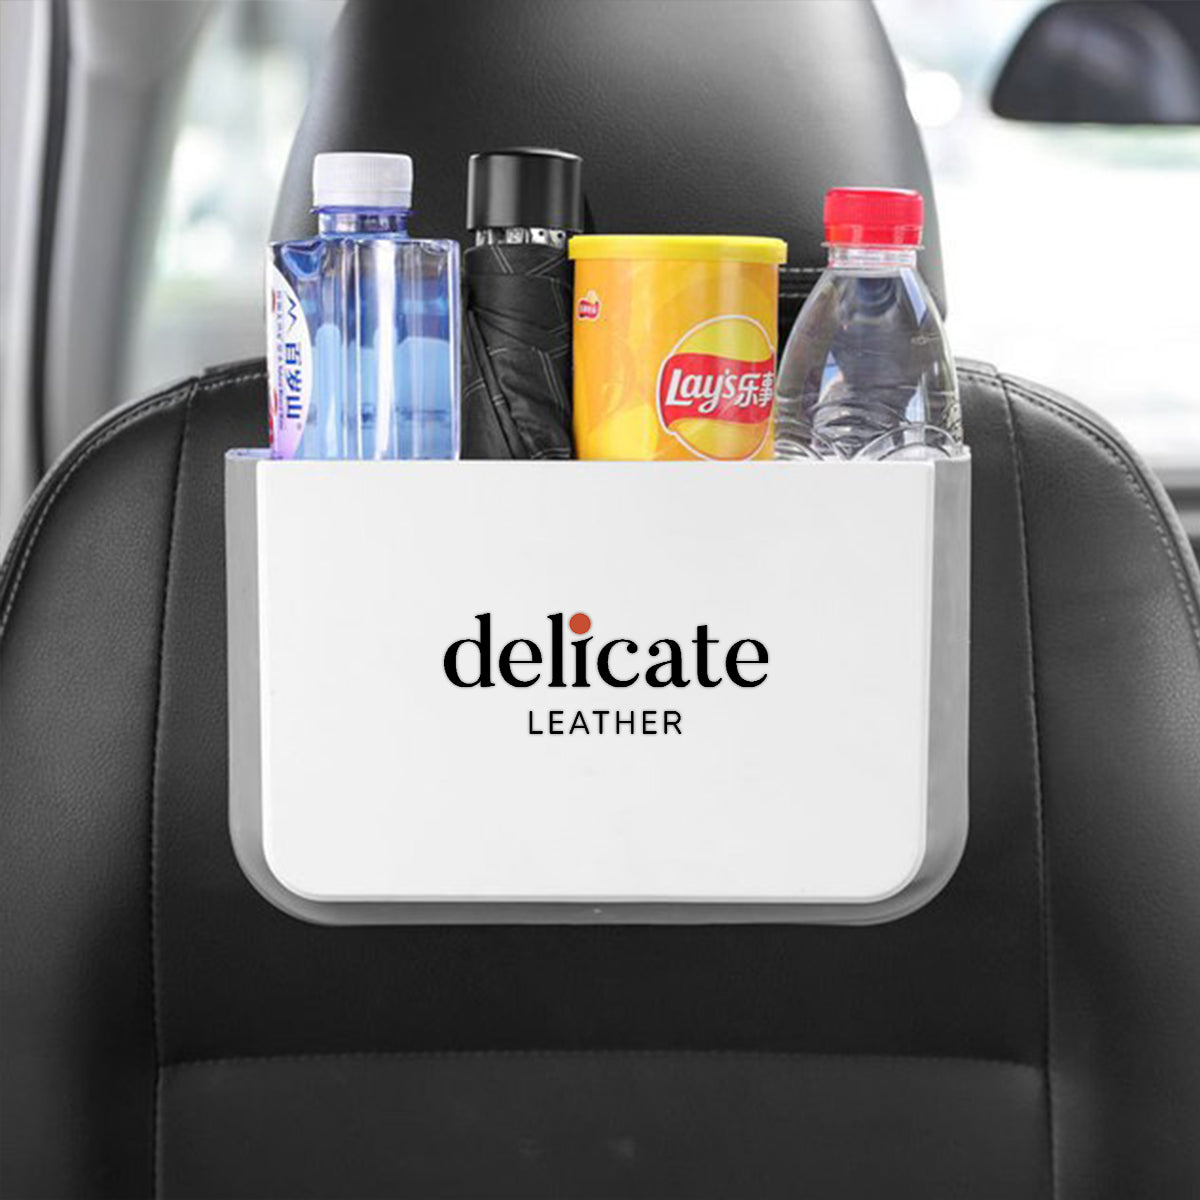 Hanging Waterproof Car Trash can-Foldable, Custom For Your Cars, Waterproof, and Equipped with Cup Holders and Trays. Multi-Purpose, Car Accessories JG11992 - Delicate Leather